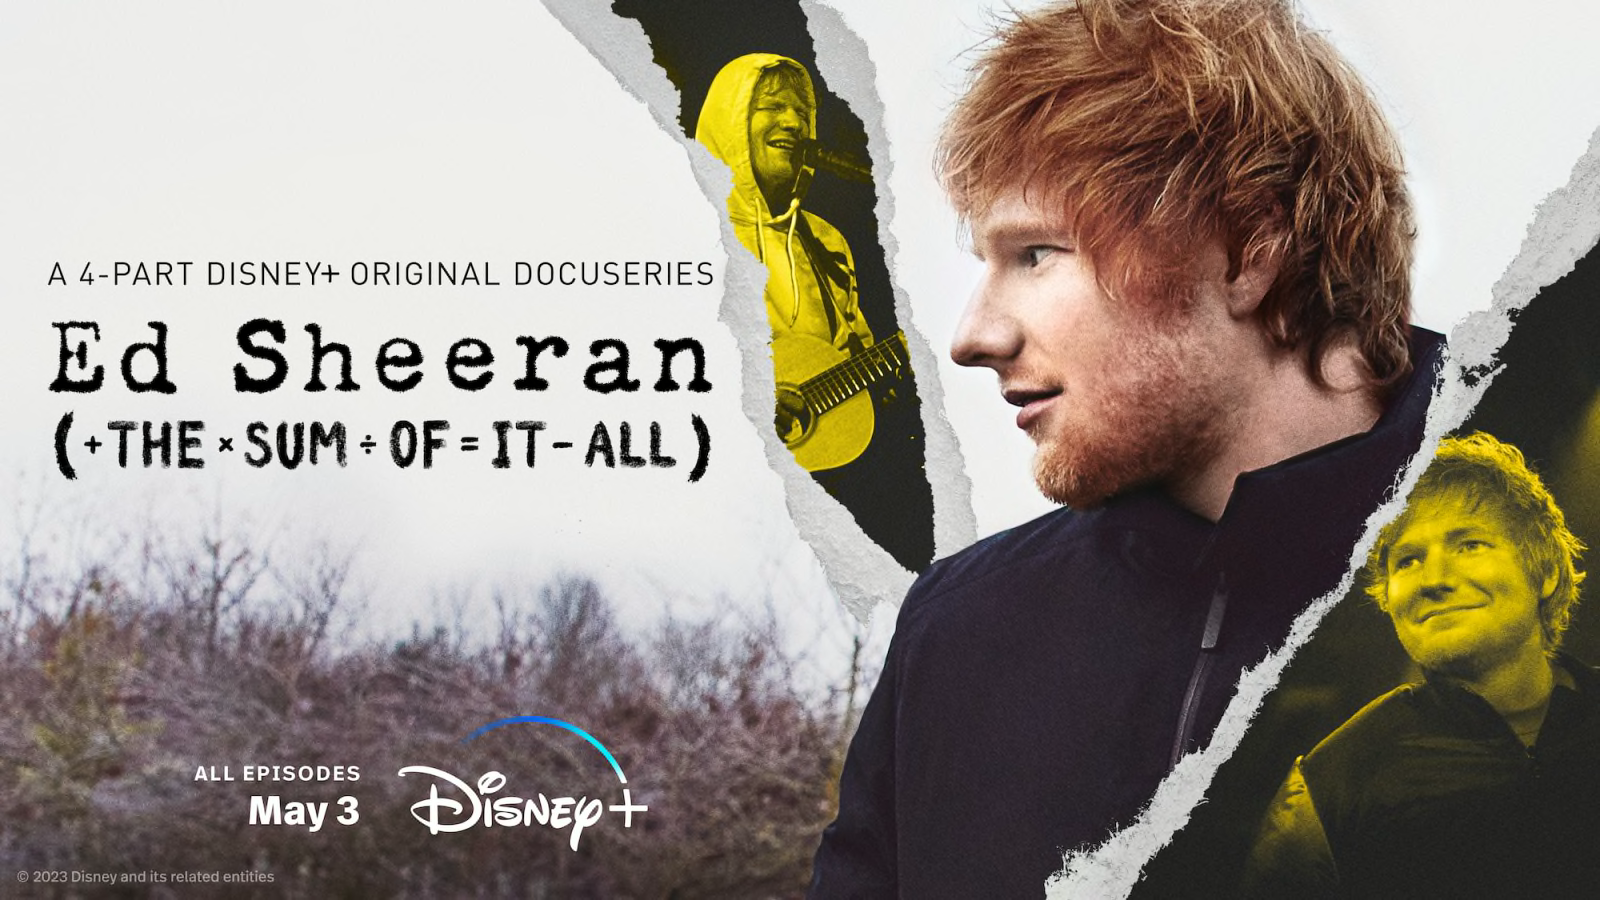 Ed Sheeran The Sum Of It All release date and more